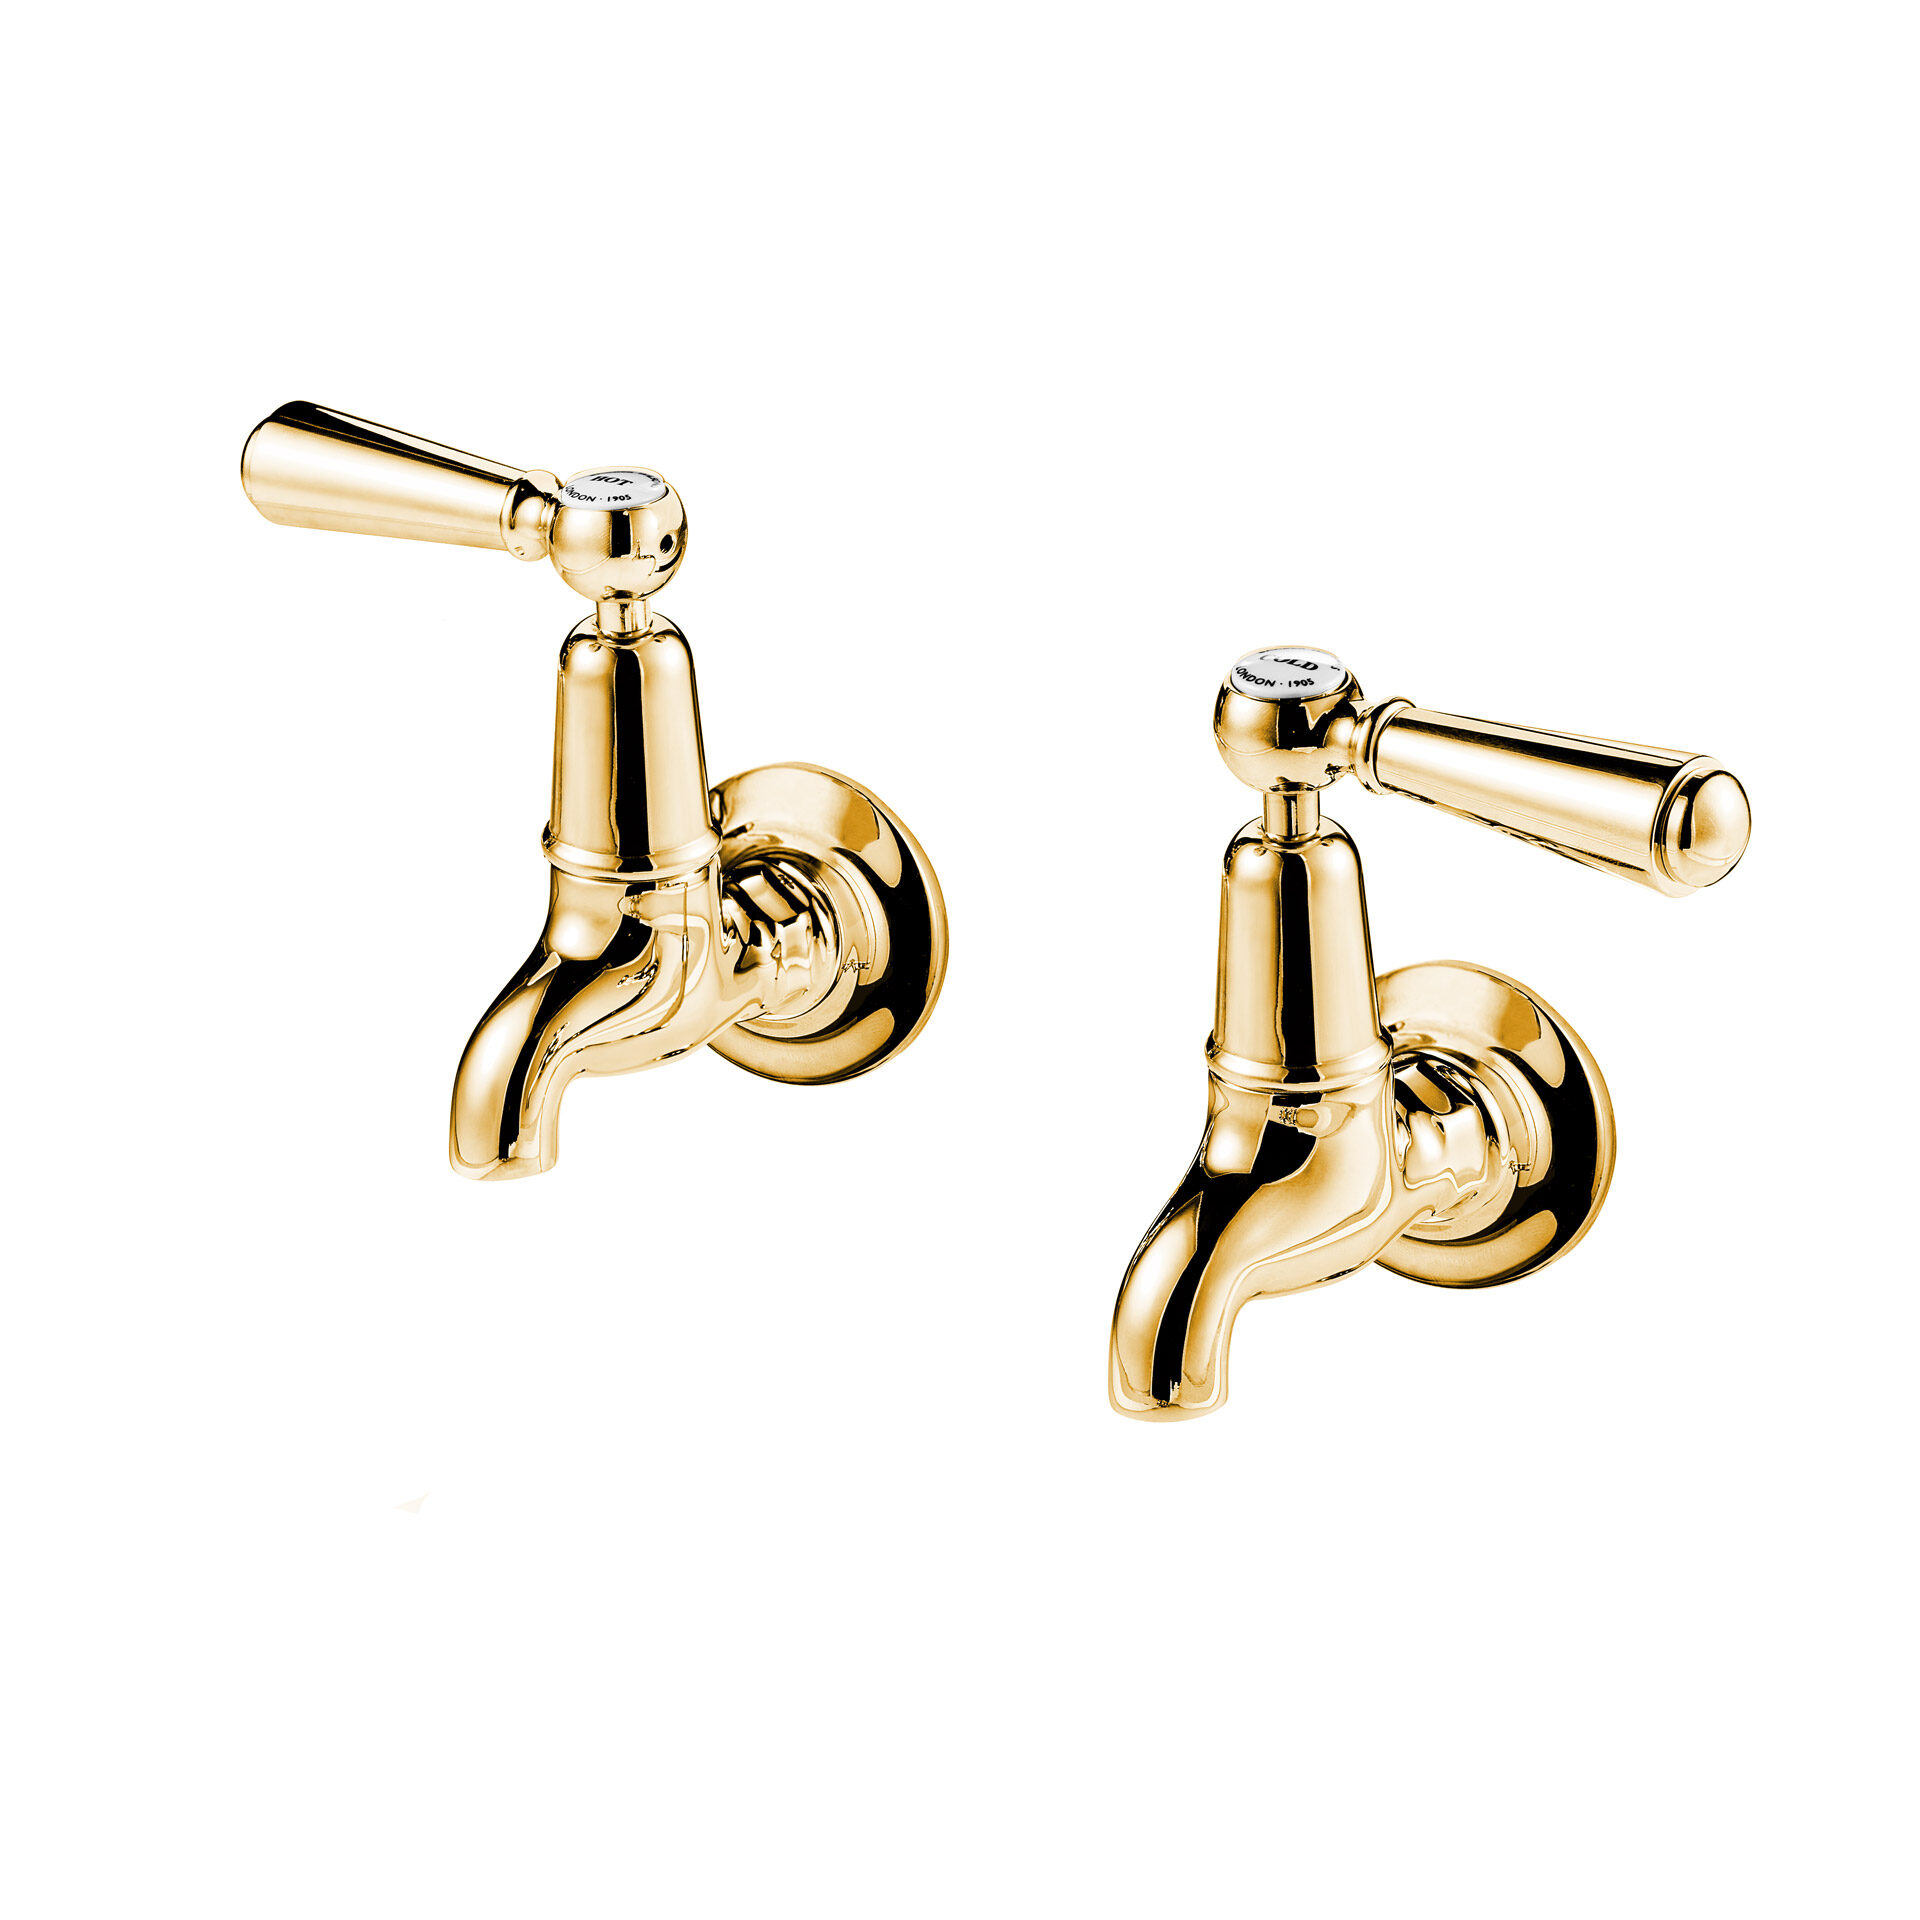 British made wall mounted bib taps in polished brass with metal lever handle